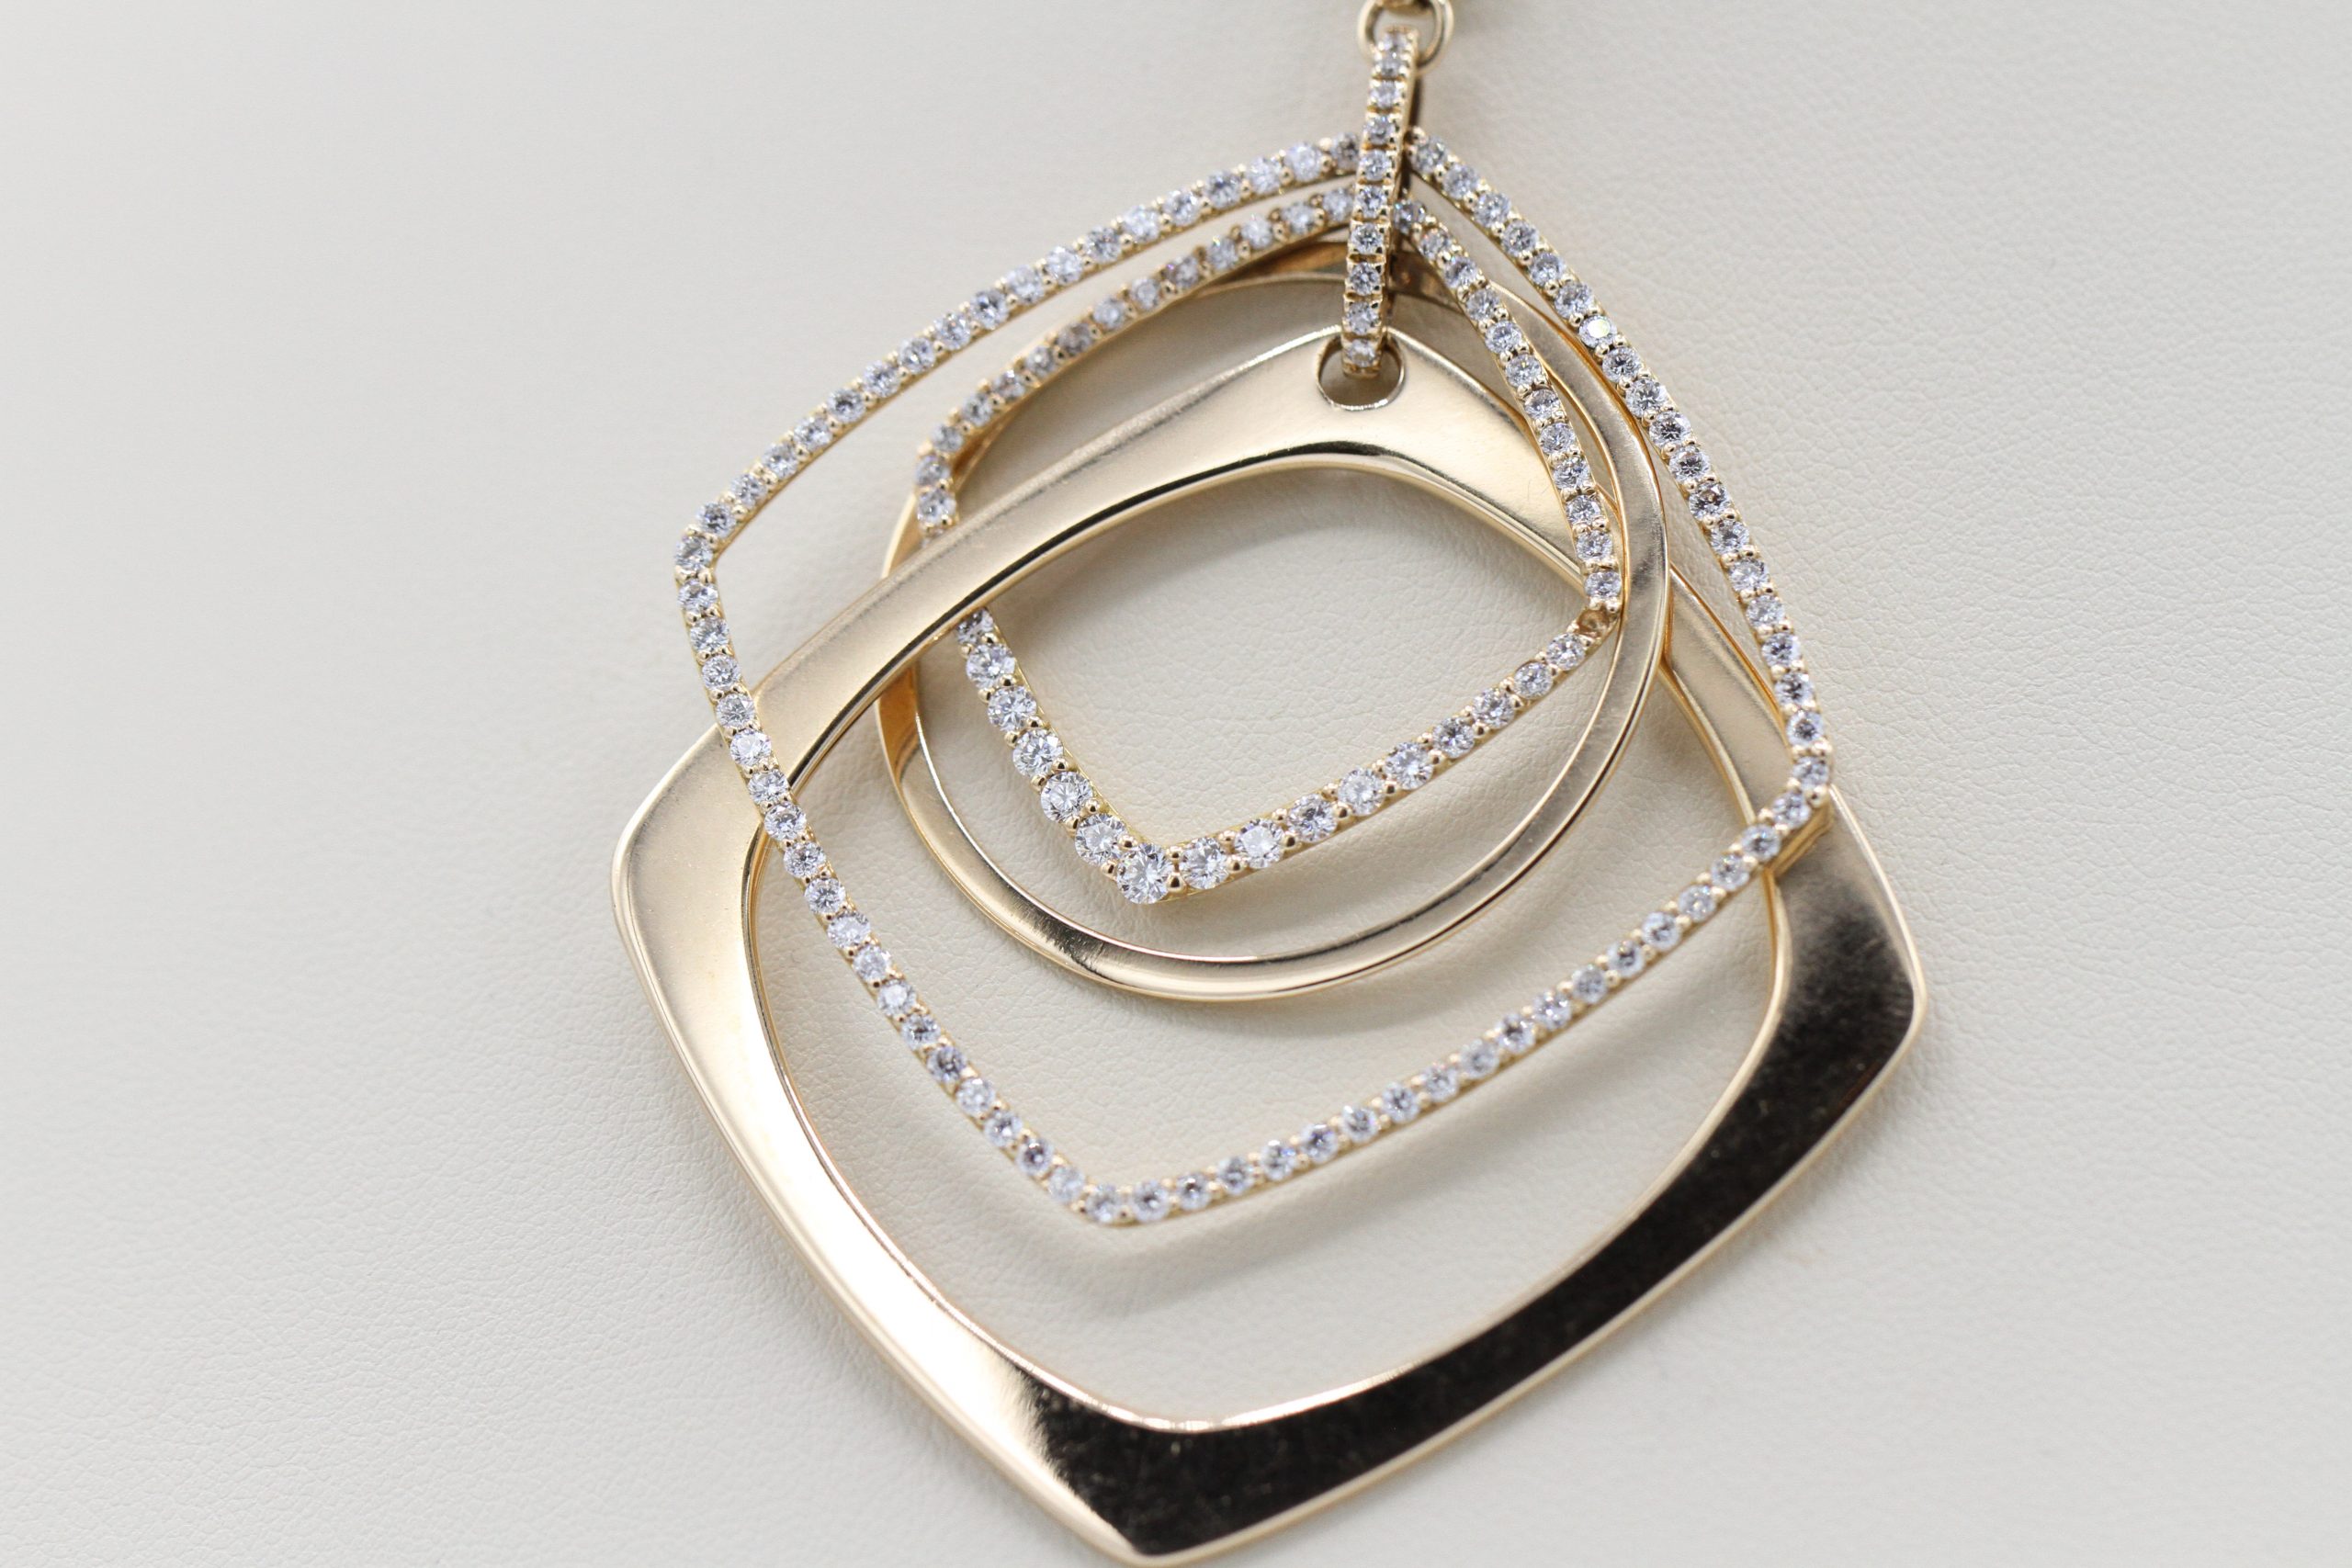 A necklace with a gold, square centerpiece inlaid with diamonds.